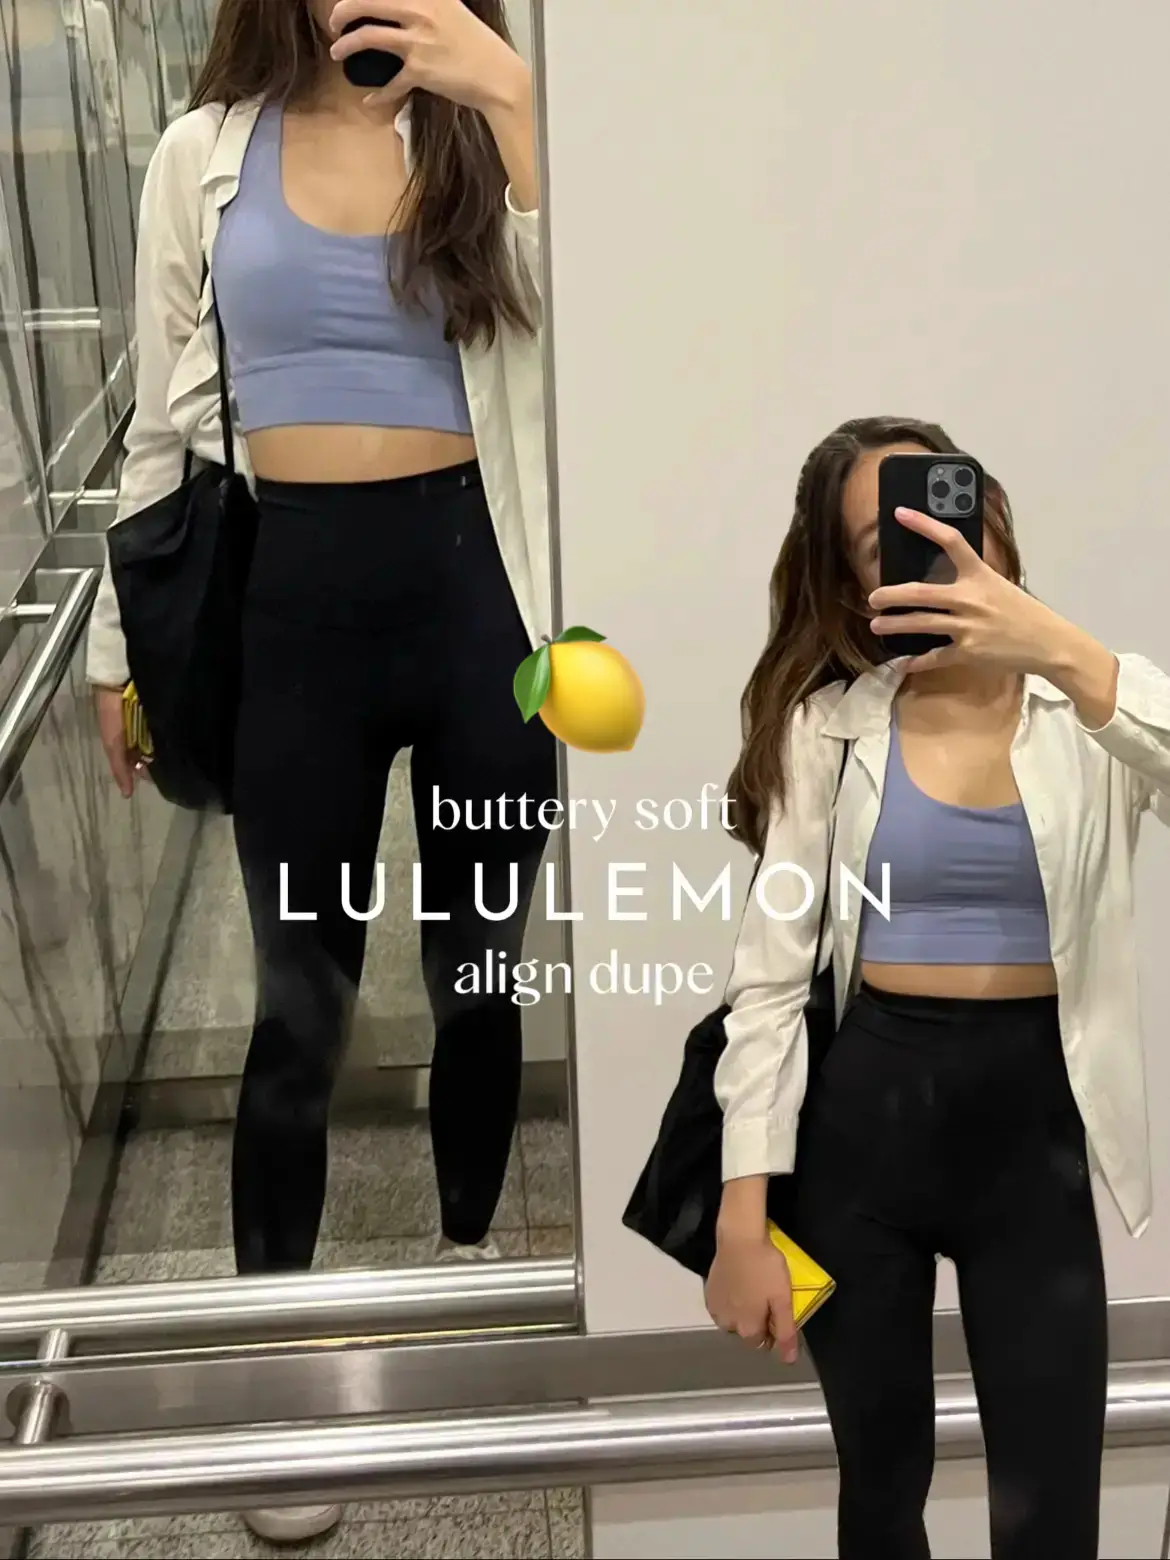 Currently in need of a dupe for the Lululemon flared align